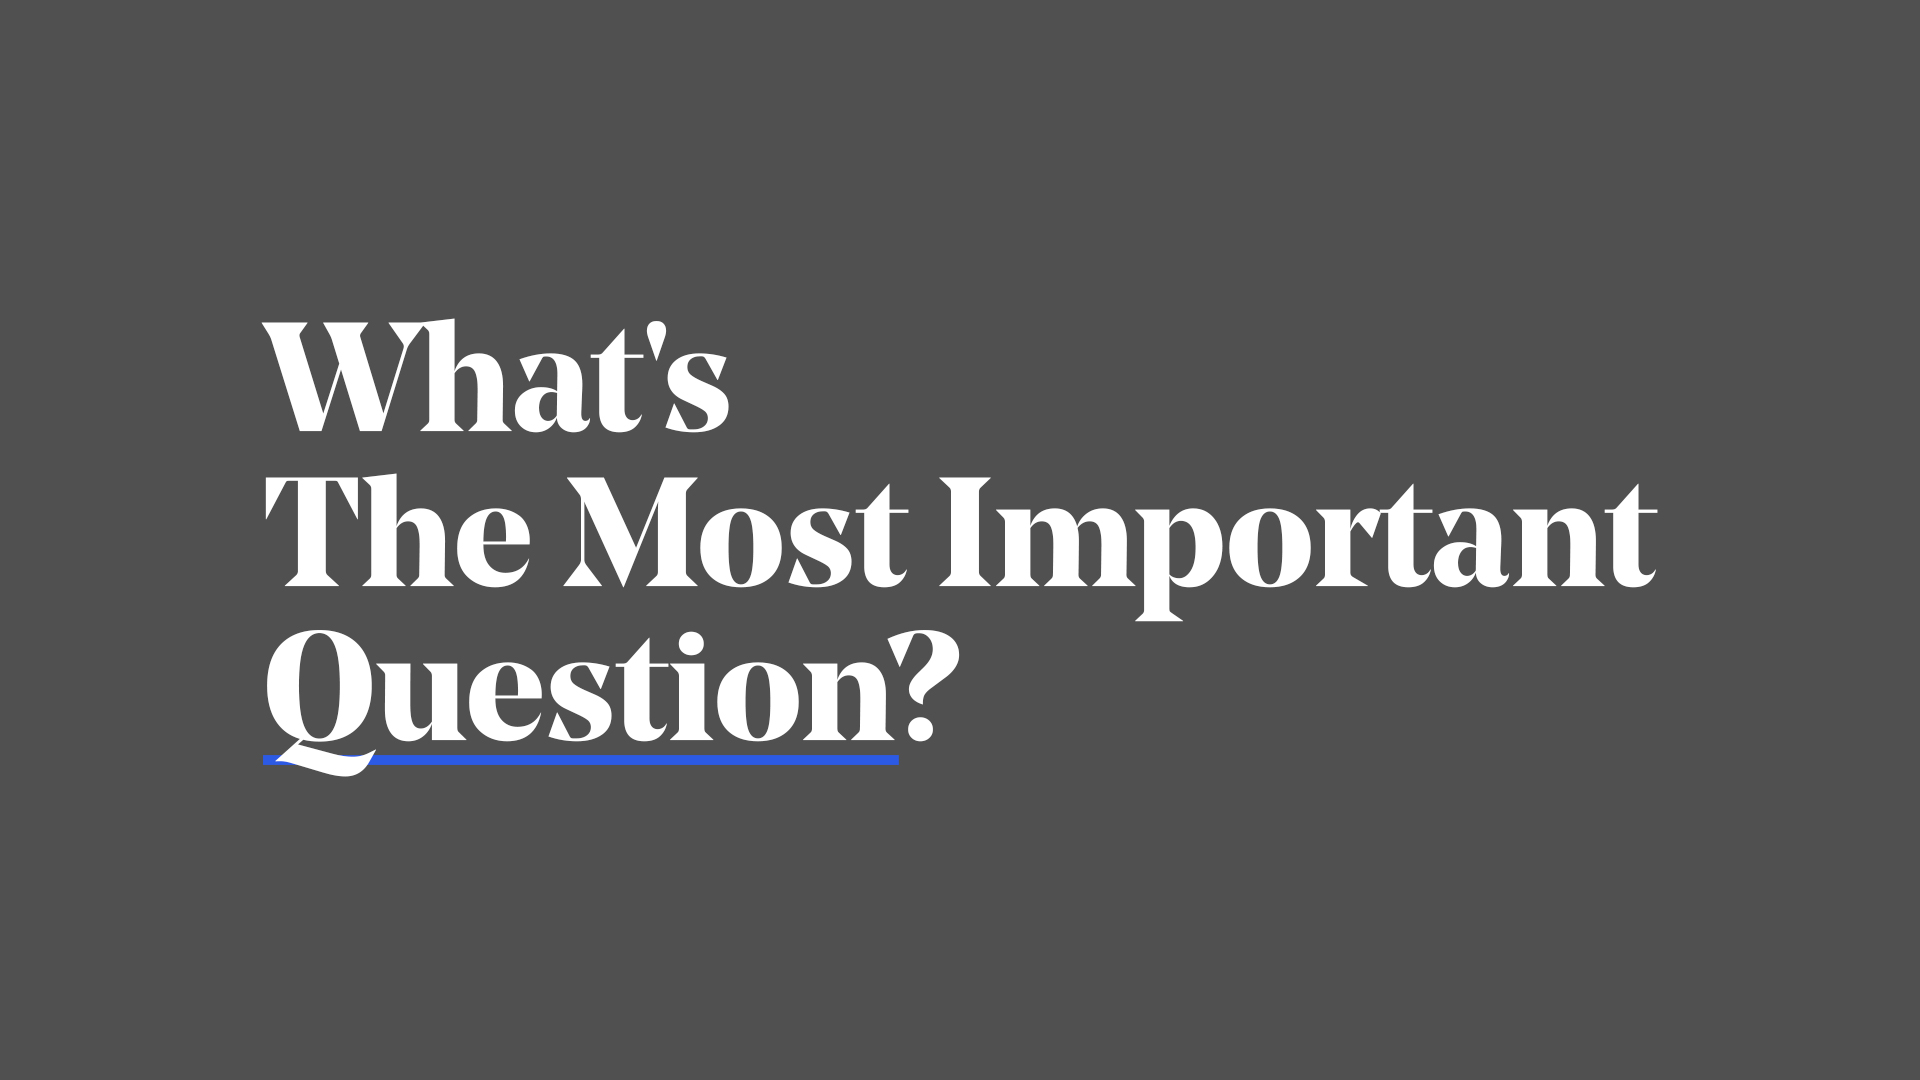 What's The Most Important Question?